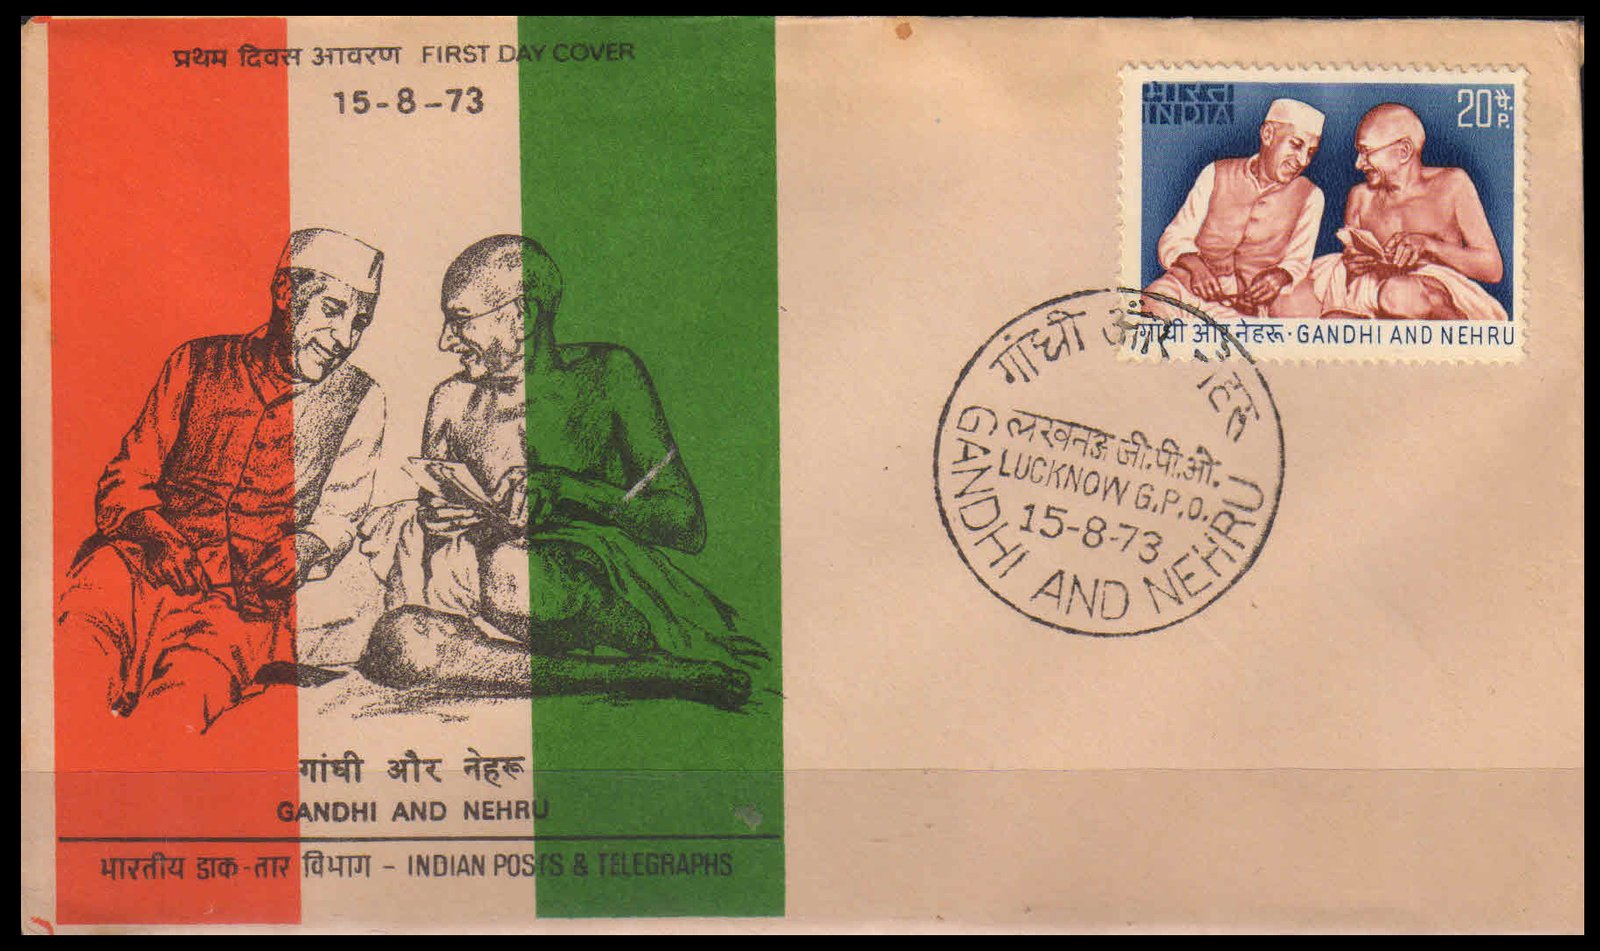 INDIA 1973 - Gandhi and Nehru, First Day Cover